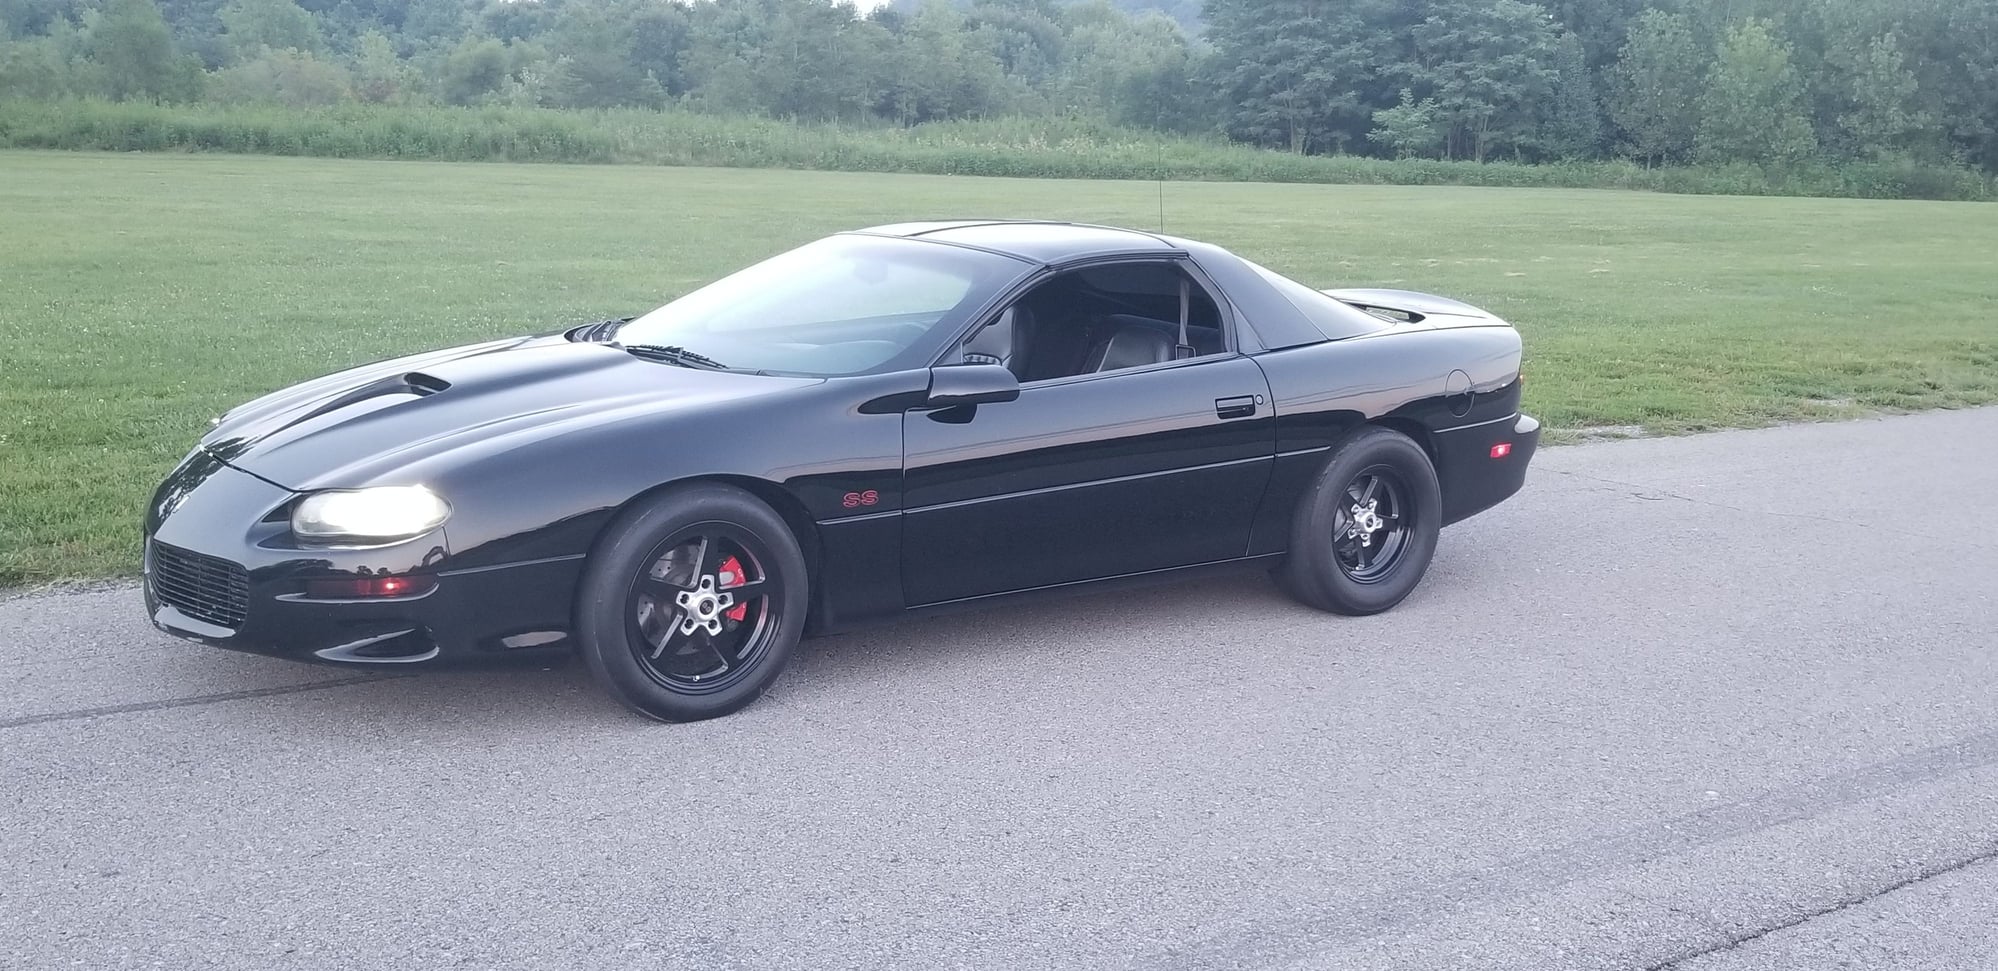 2000 Chevrolet Camaro - 2000 Turbo SS (Ls2) - Used - VIN 2g1fp22g4y2167220 - 79,000 Miles - 8 cyl - 2WD - Automatic - Coupe - Black - Louisville, KY 40291, United States